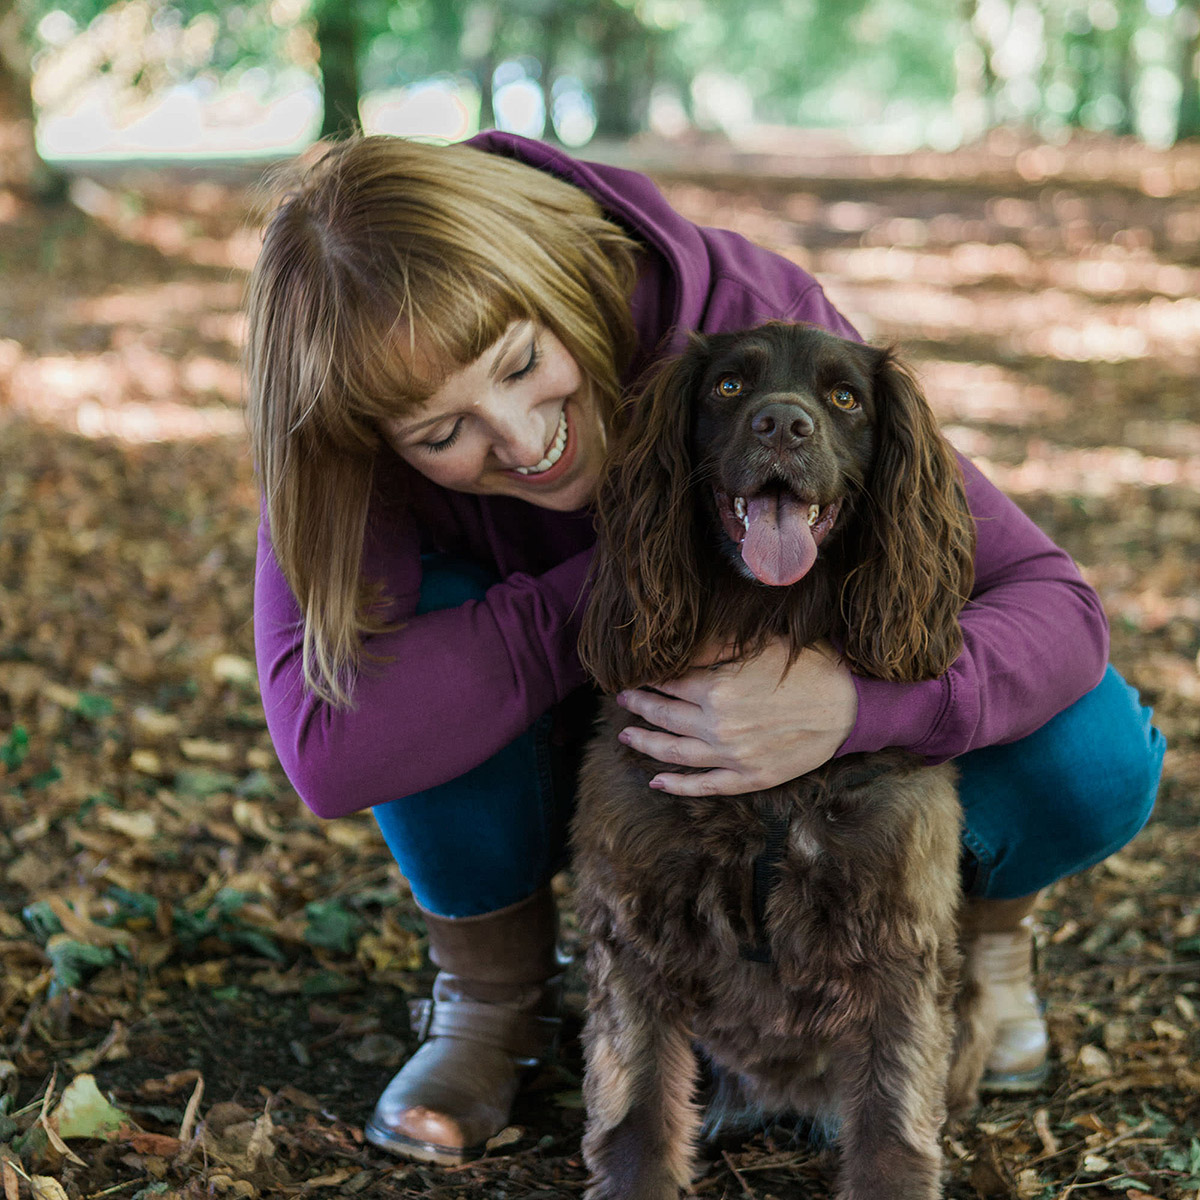 Ginny Marsh | Photographer and pet lover